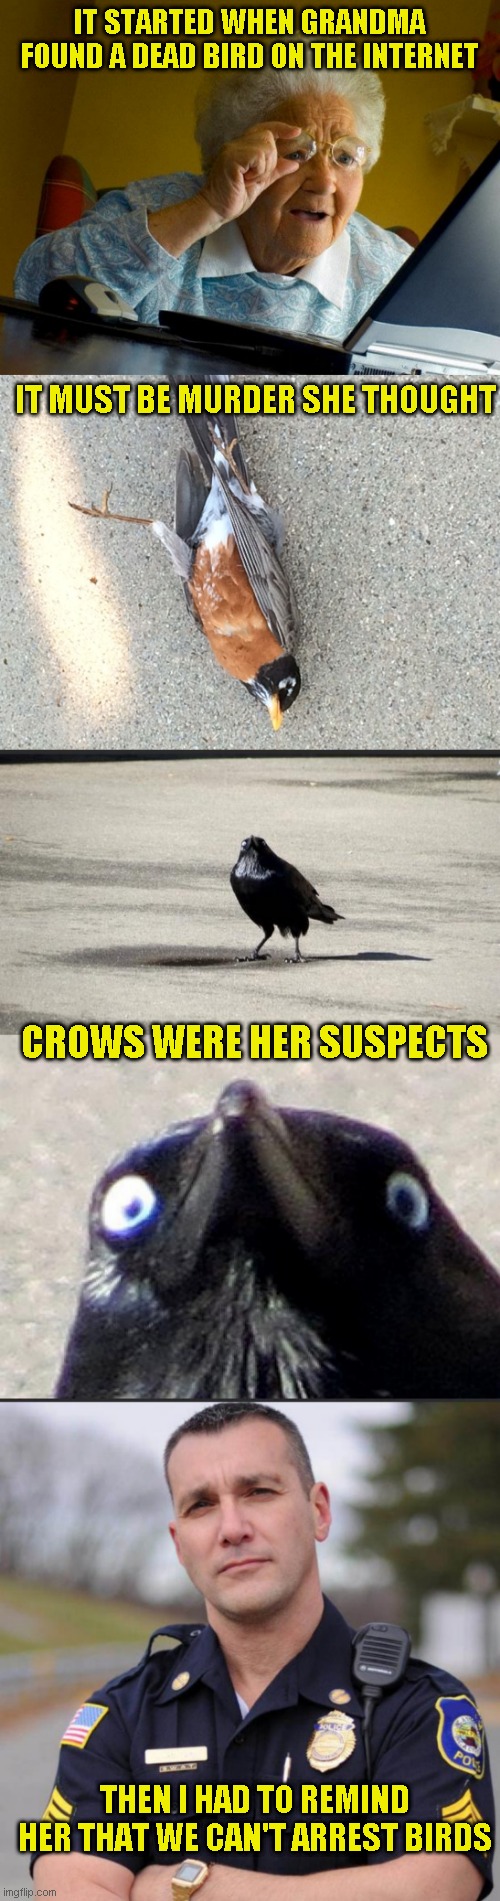 A very short mystery | IT STARTED WHEN GRANDMA FOUND A DEAD BIRD ON THE INTERNET; IT MUST BE MURDER SHE THOUGHT; CROWS WERE HER SUSPECTS; THEN I HAD TO REMIND HER THAT WE CAN'T ARREST BIRDS | image tagged in just a joke,short mysteries | made w/ Imgflip meme maker